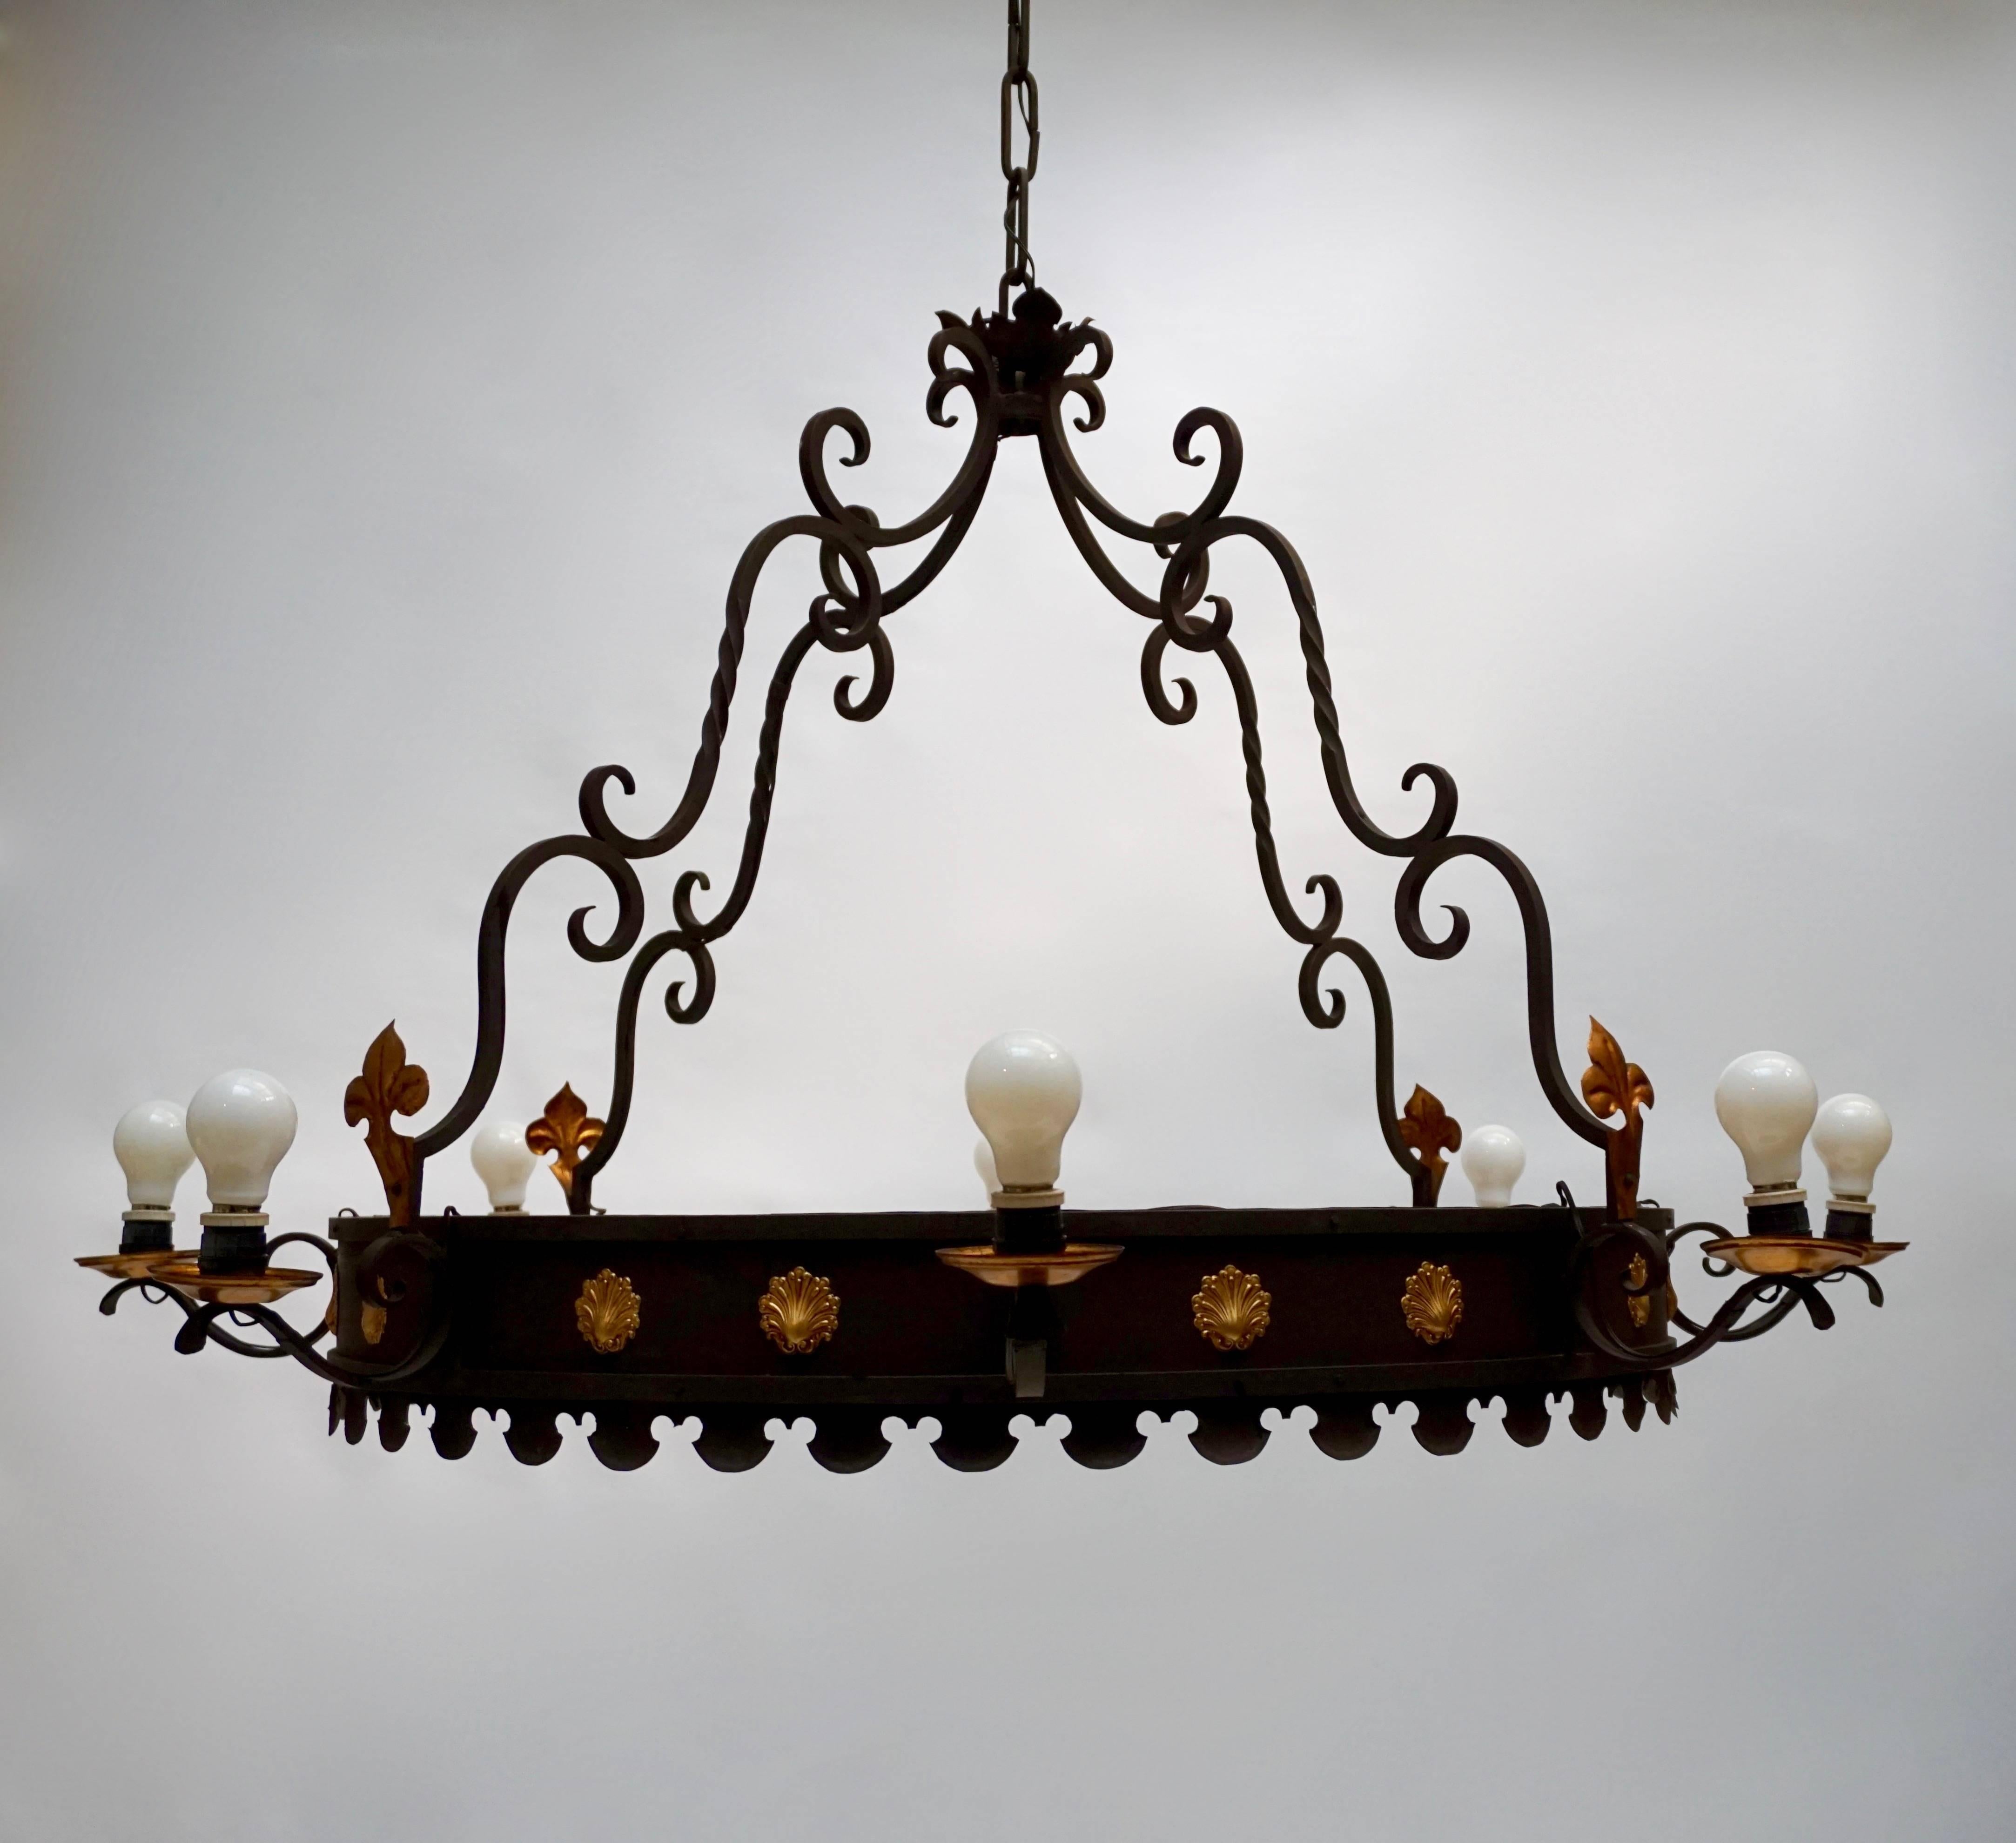 A very large and highly decorative wrought iron eight-light circular chandelier in the medieval revival style of the 1940s, decorated with gilt iron scallops, rosaces and lilies.

The chandelier has eight sockets for incandescent lamps with screw